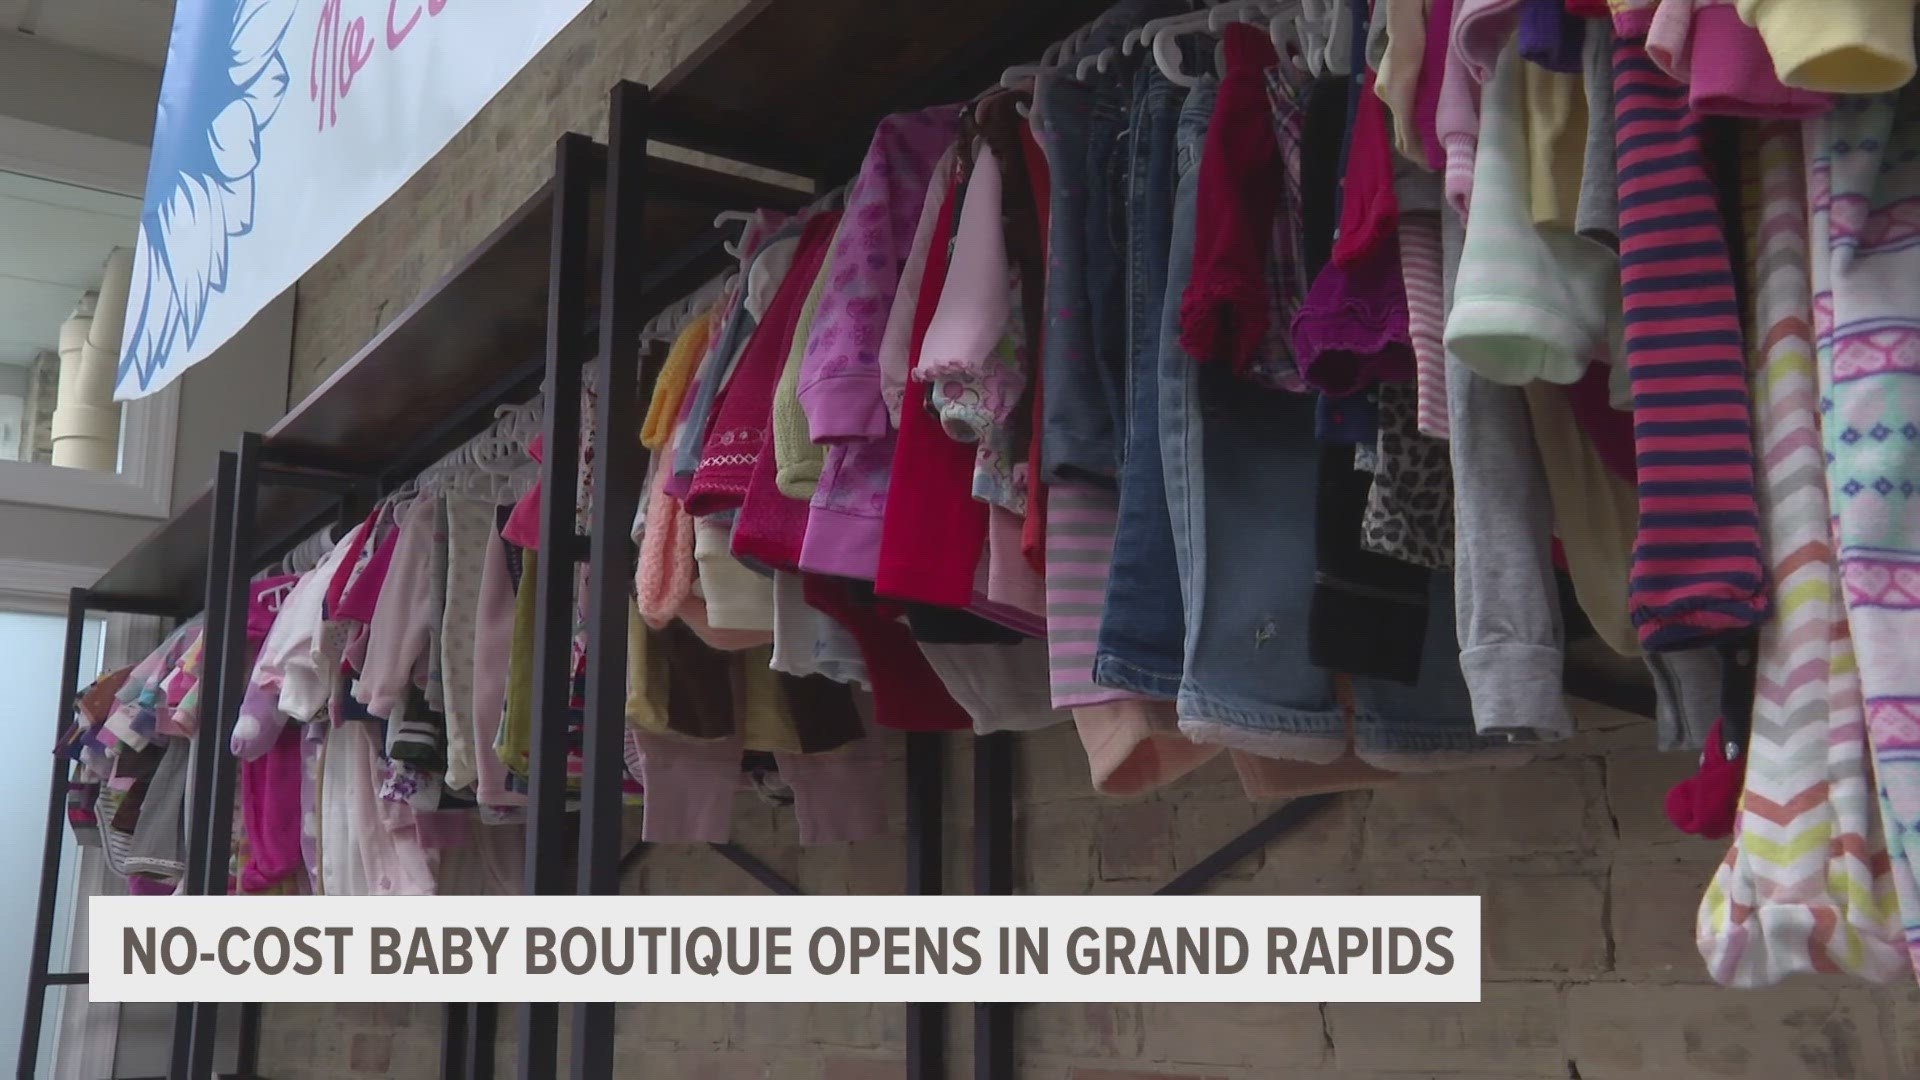 Grand Rapids no-cost baby boutique opens